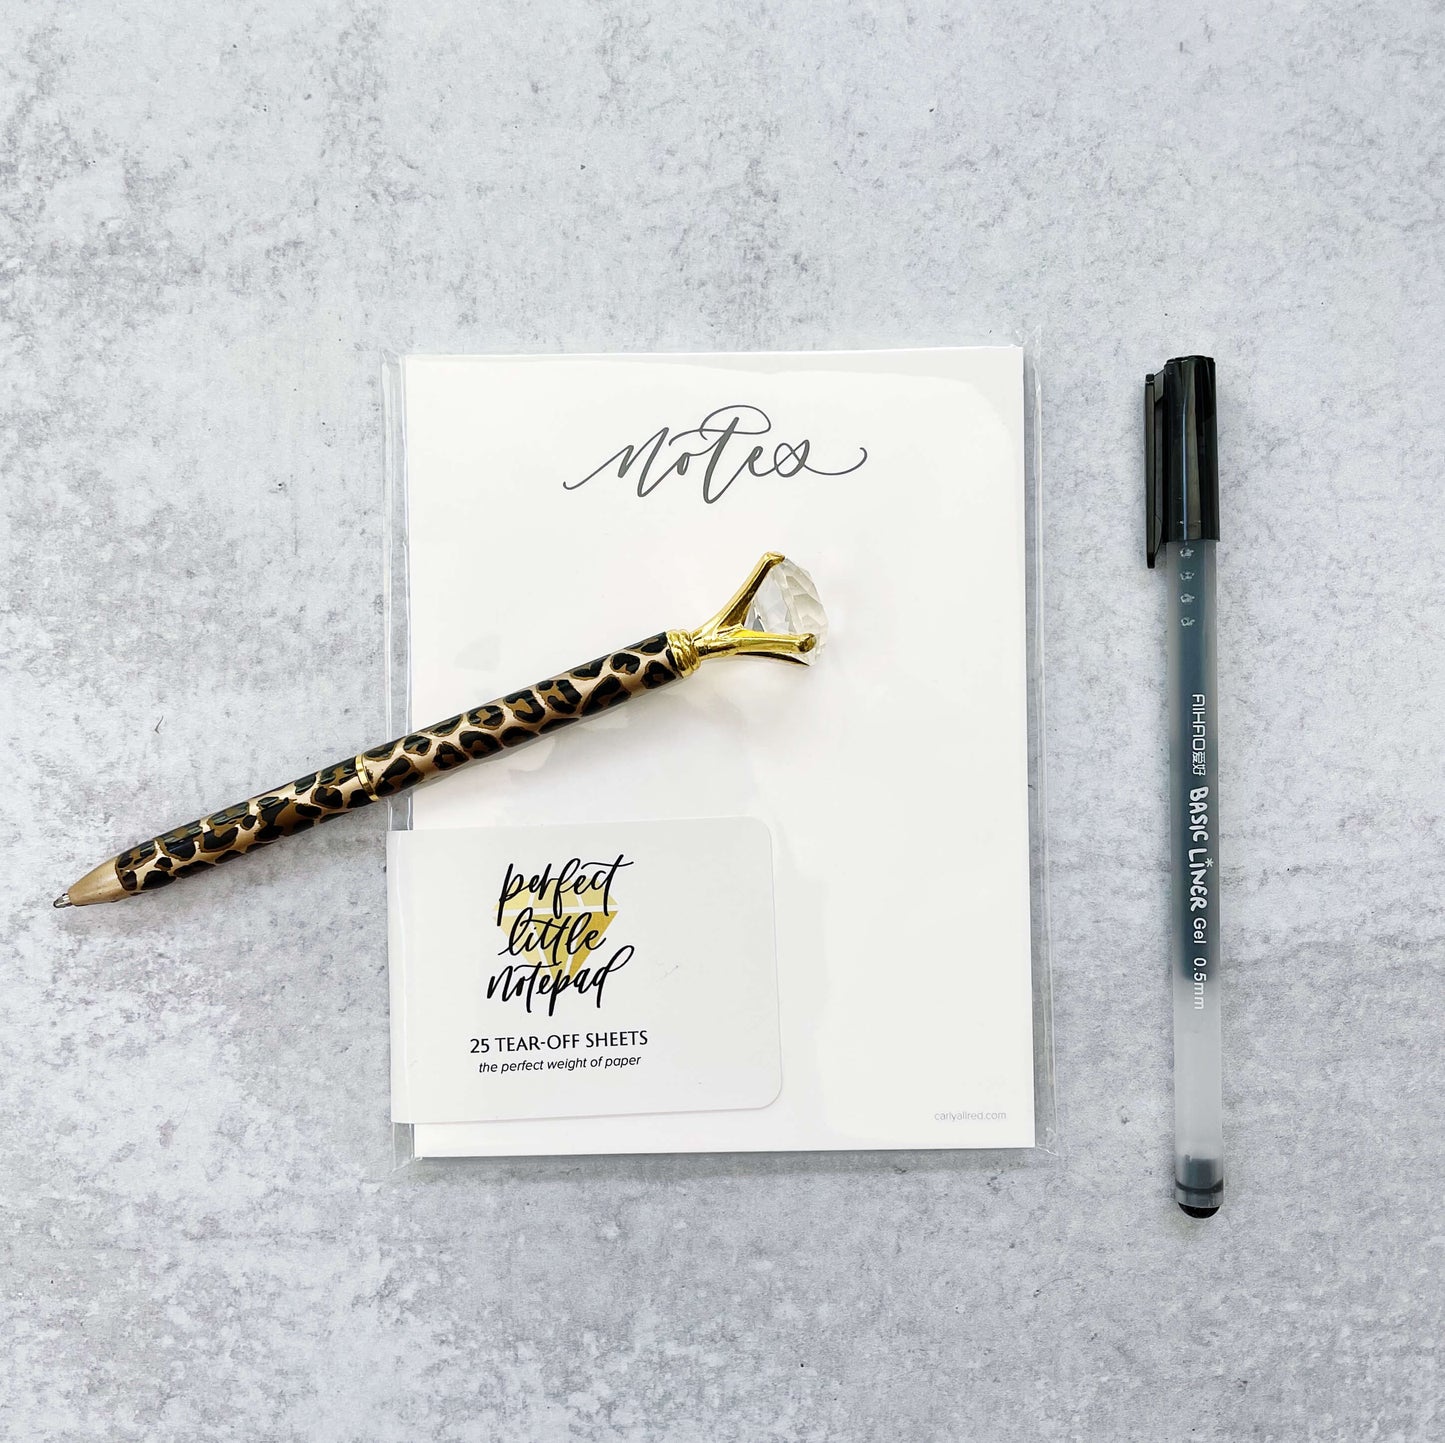 Perfect Little Notepad - "Notes"